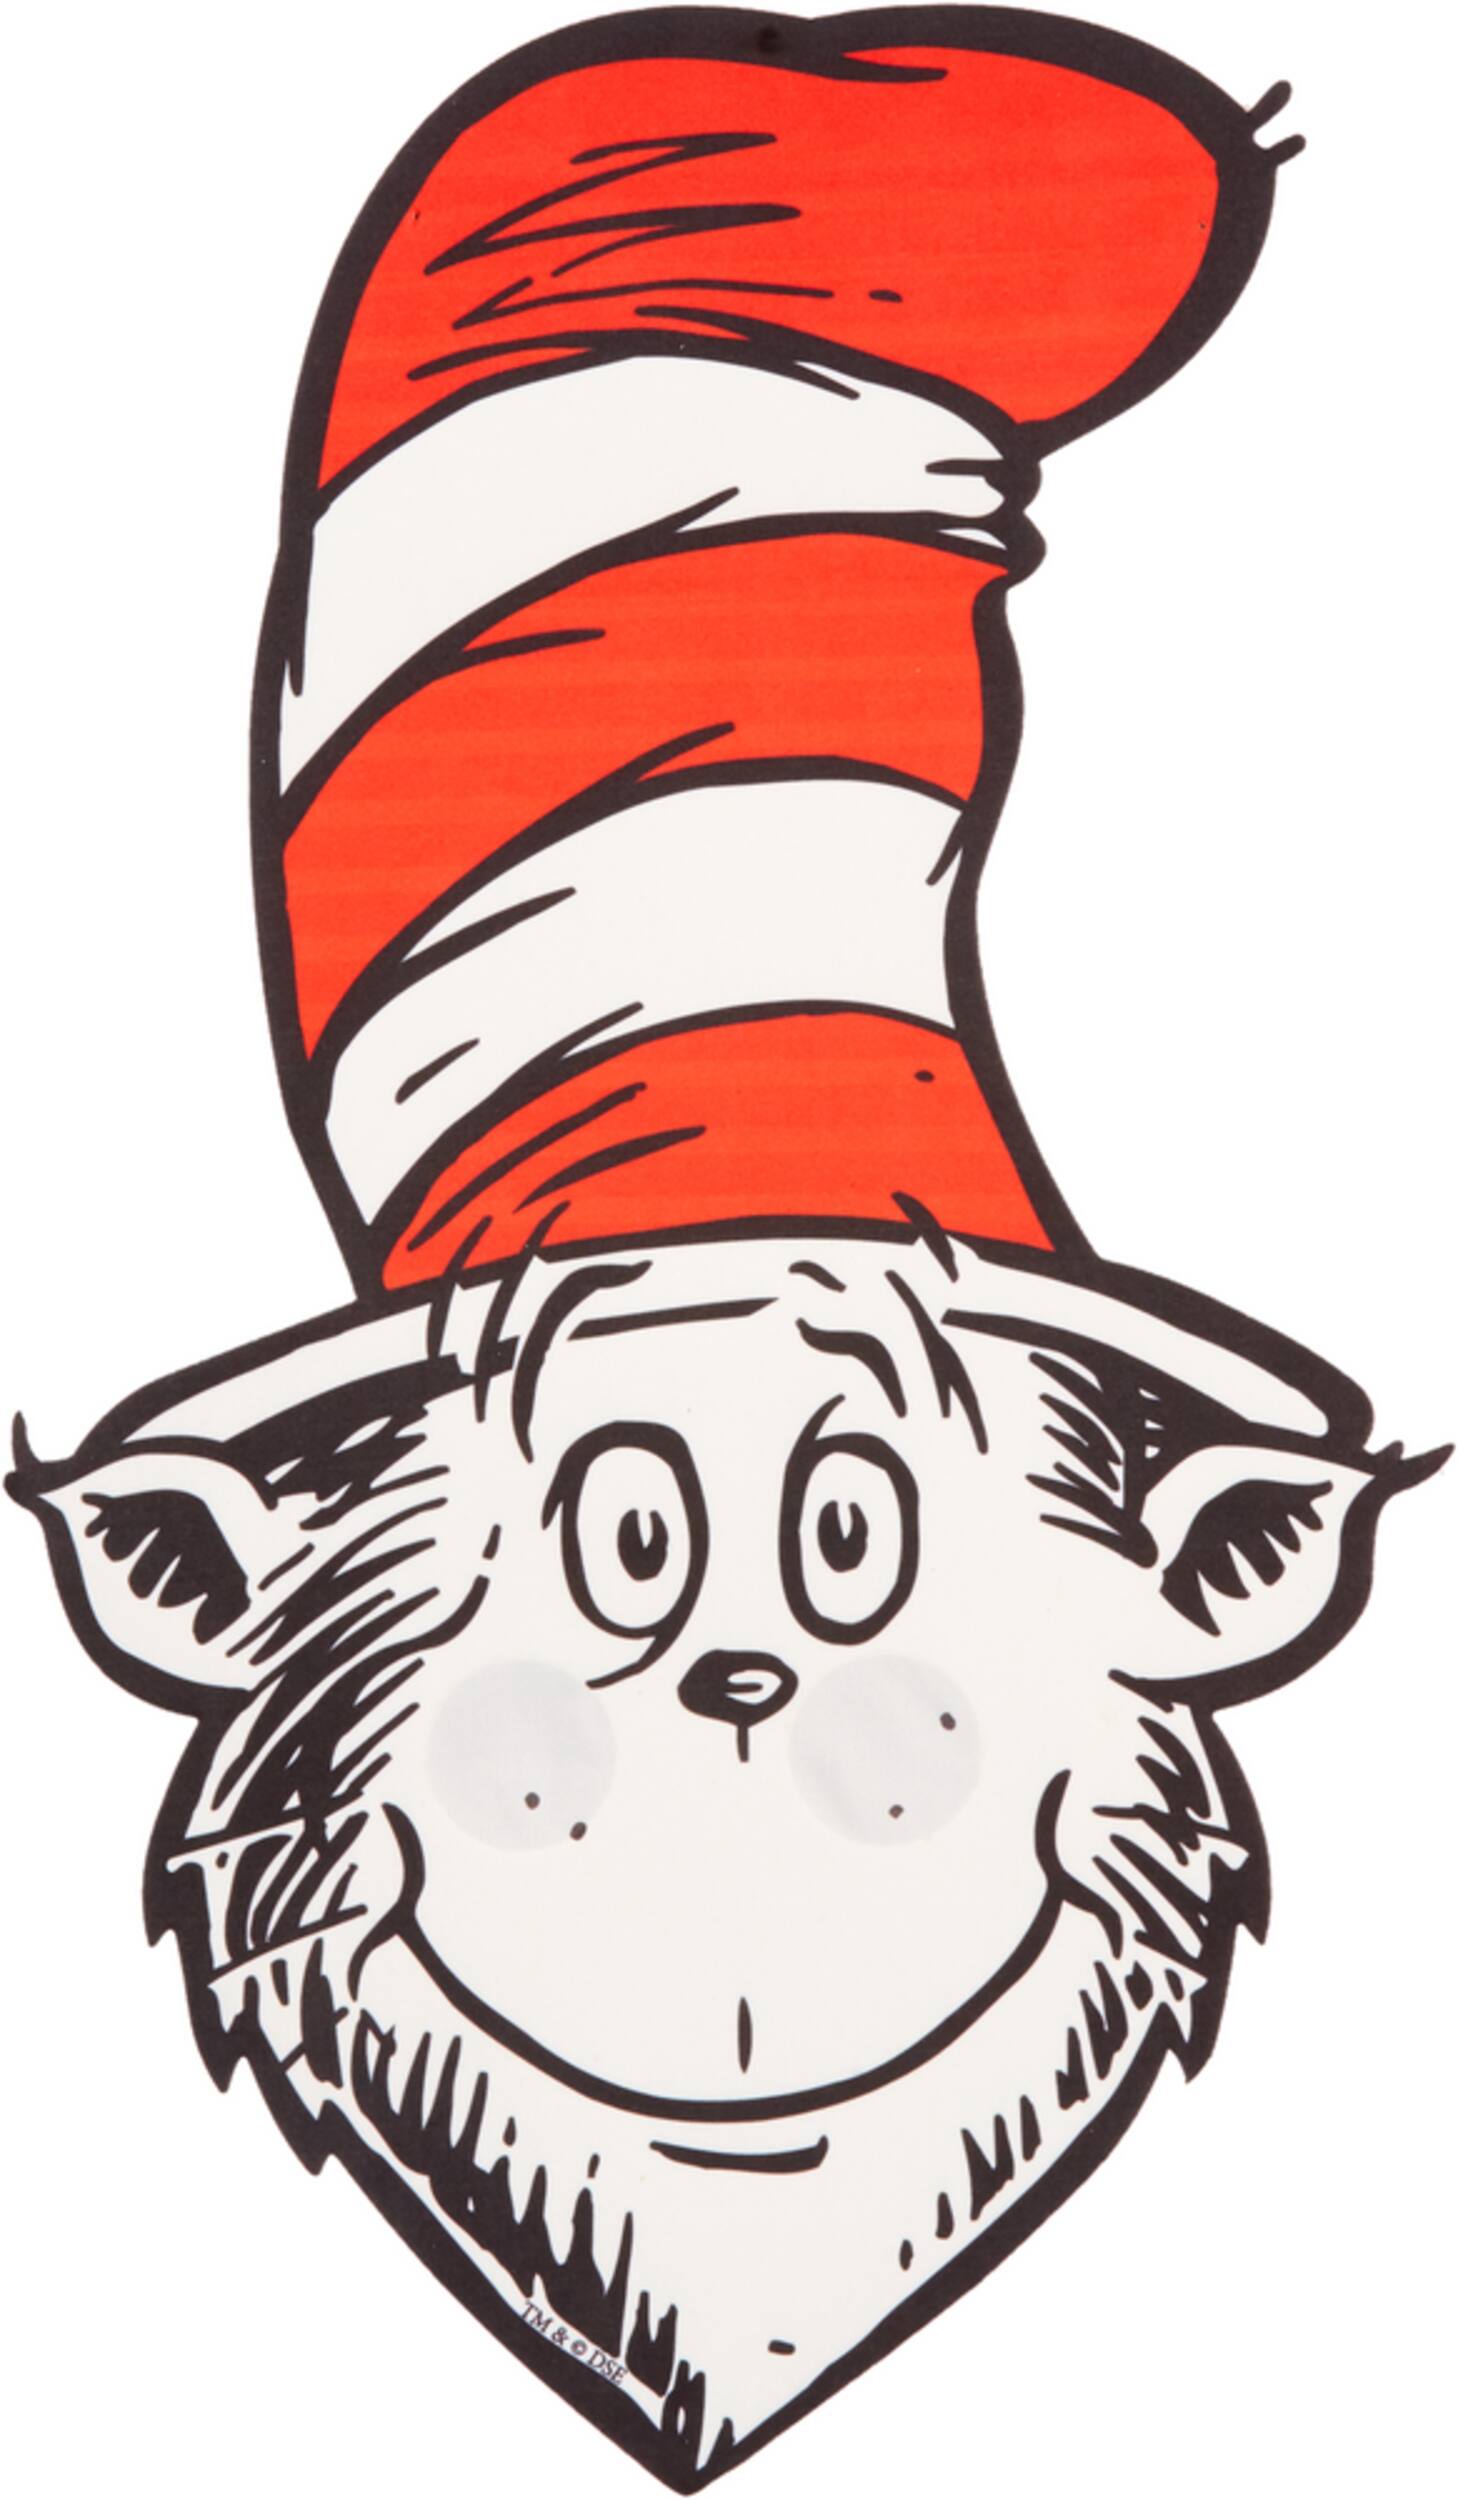 Dr. Seuss Oversized Cat in the Hat Mask | Party City